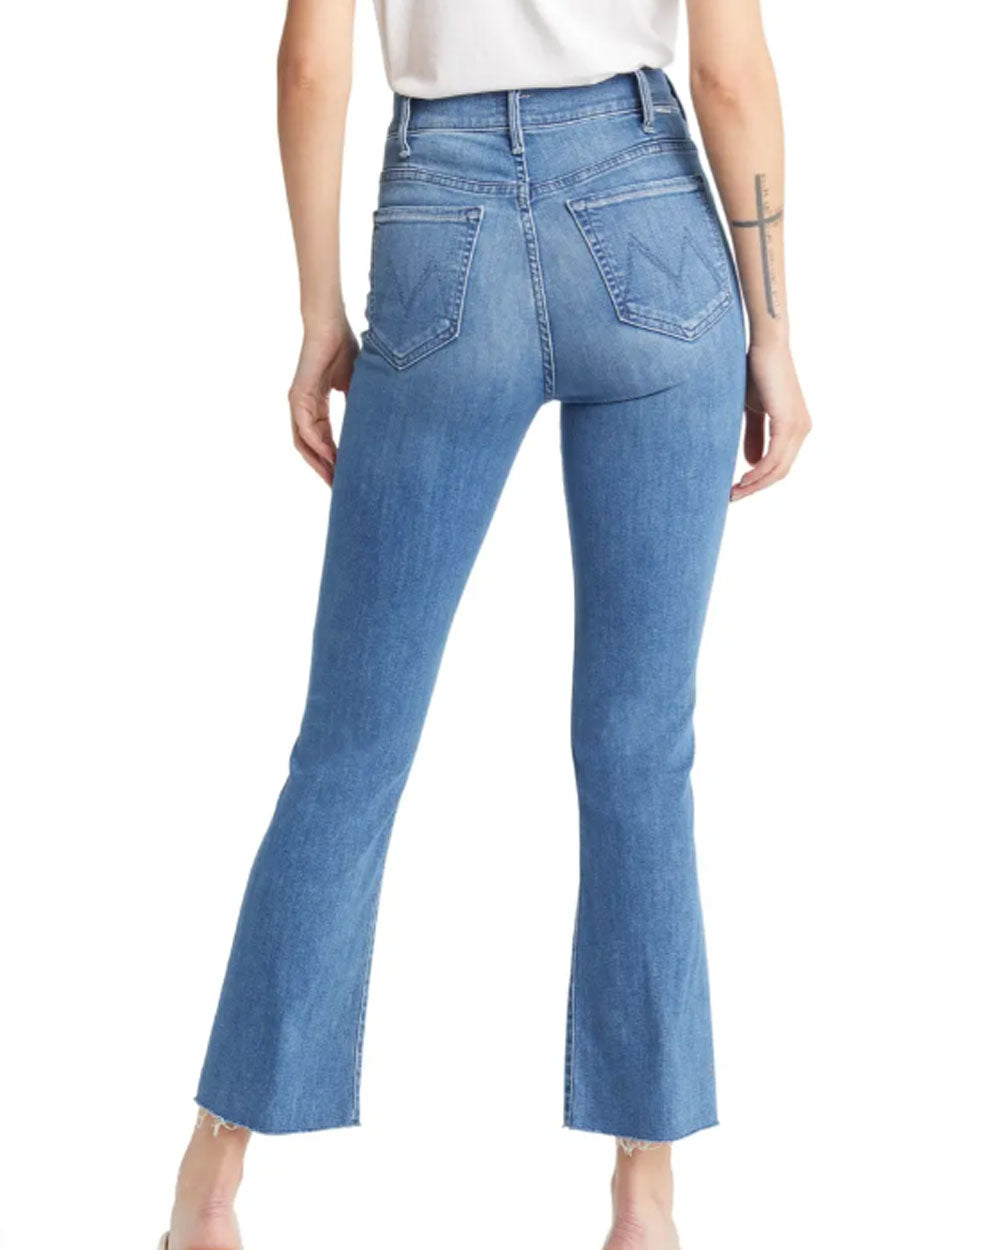 The Hustler Ankle Fray Jean in Can’t Stop Staring